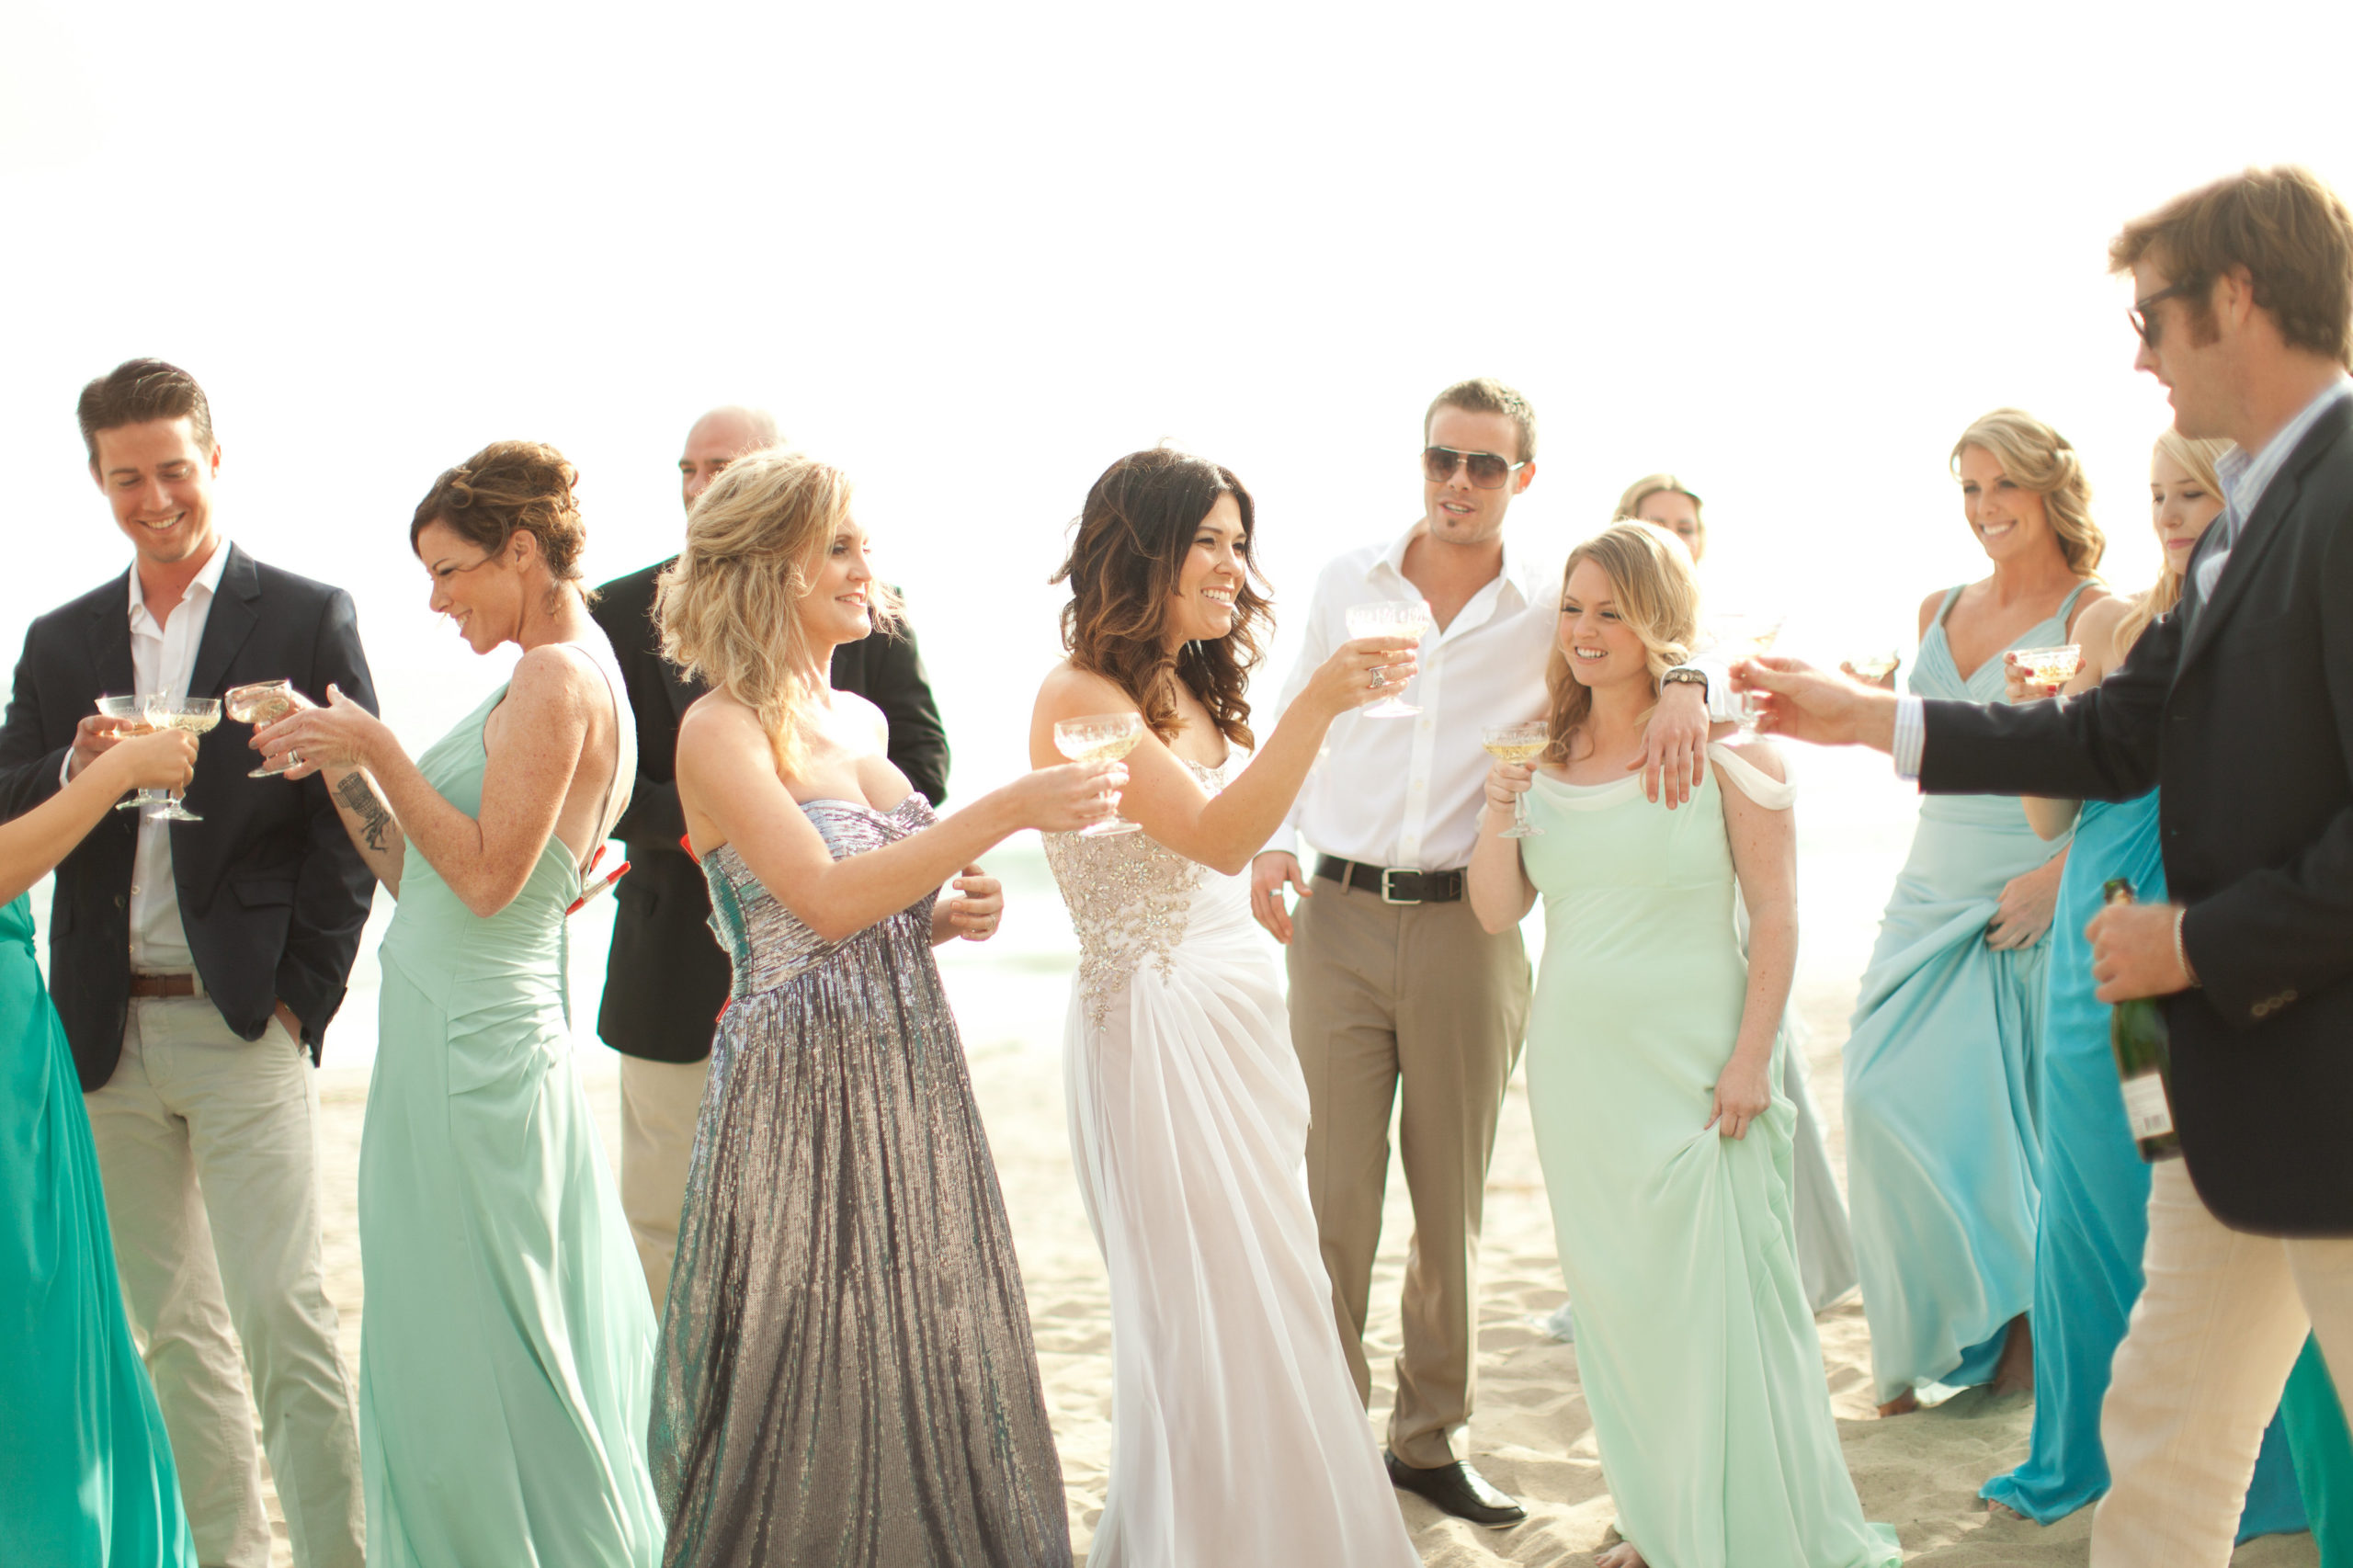 View More: http://chrisandkristenphotography.pass.us/archiverentals